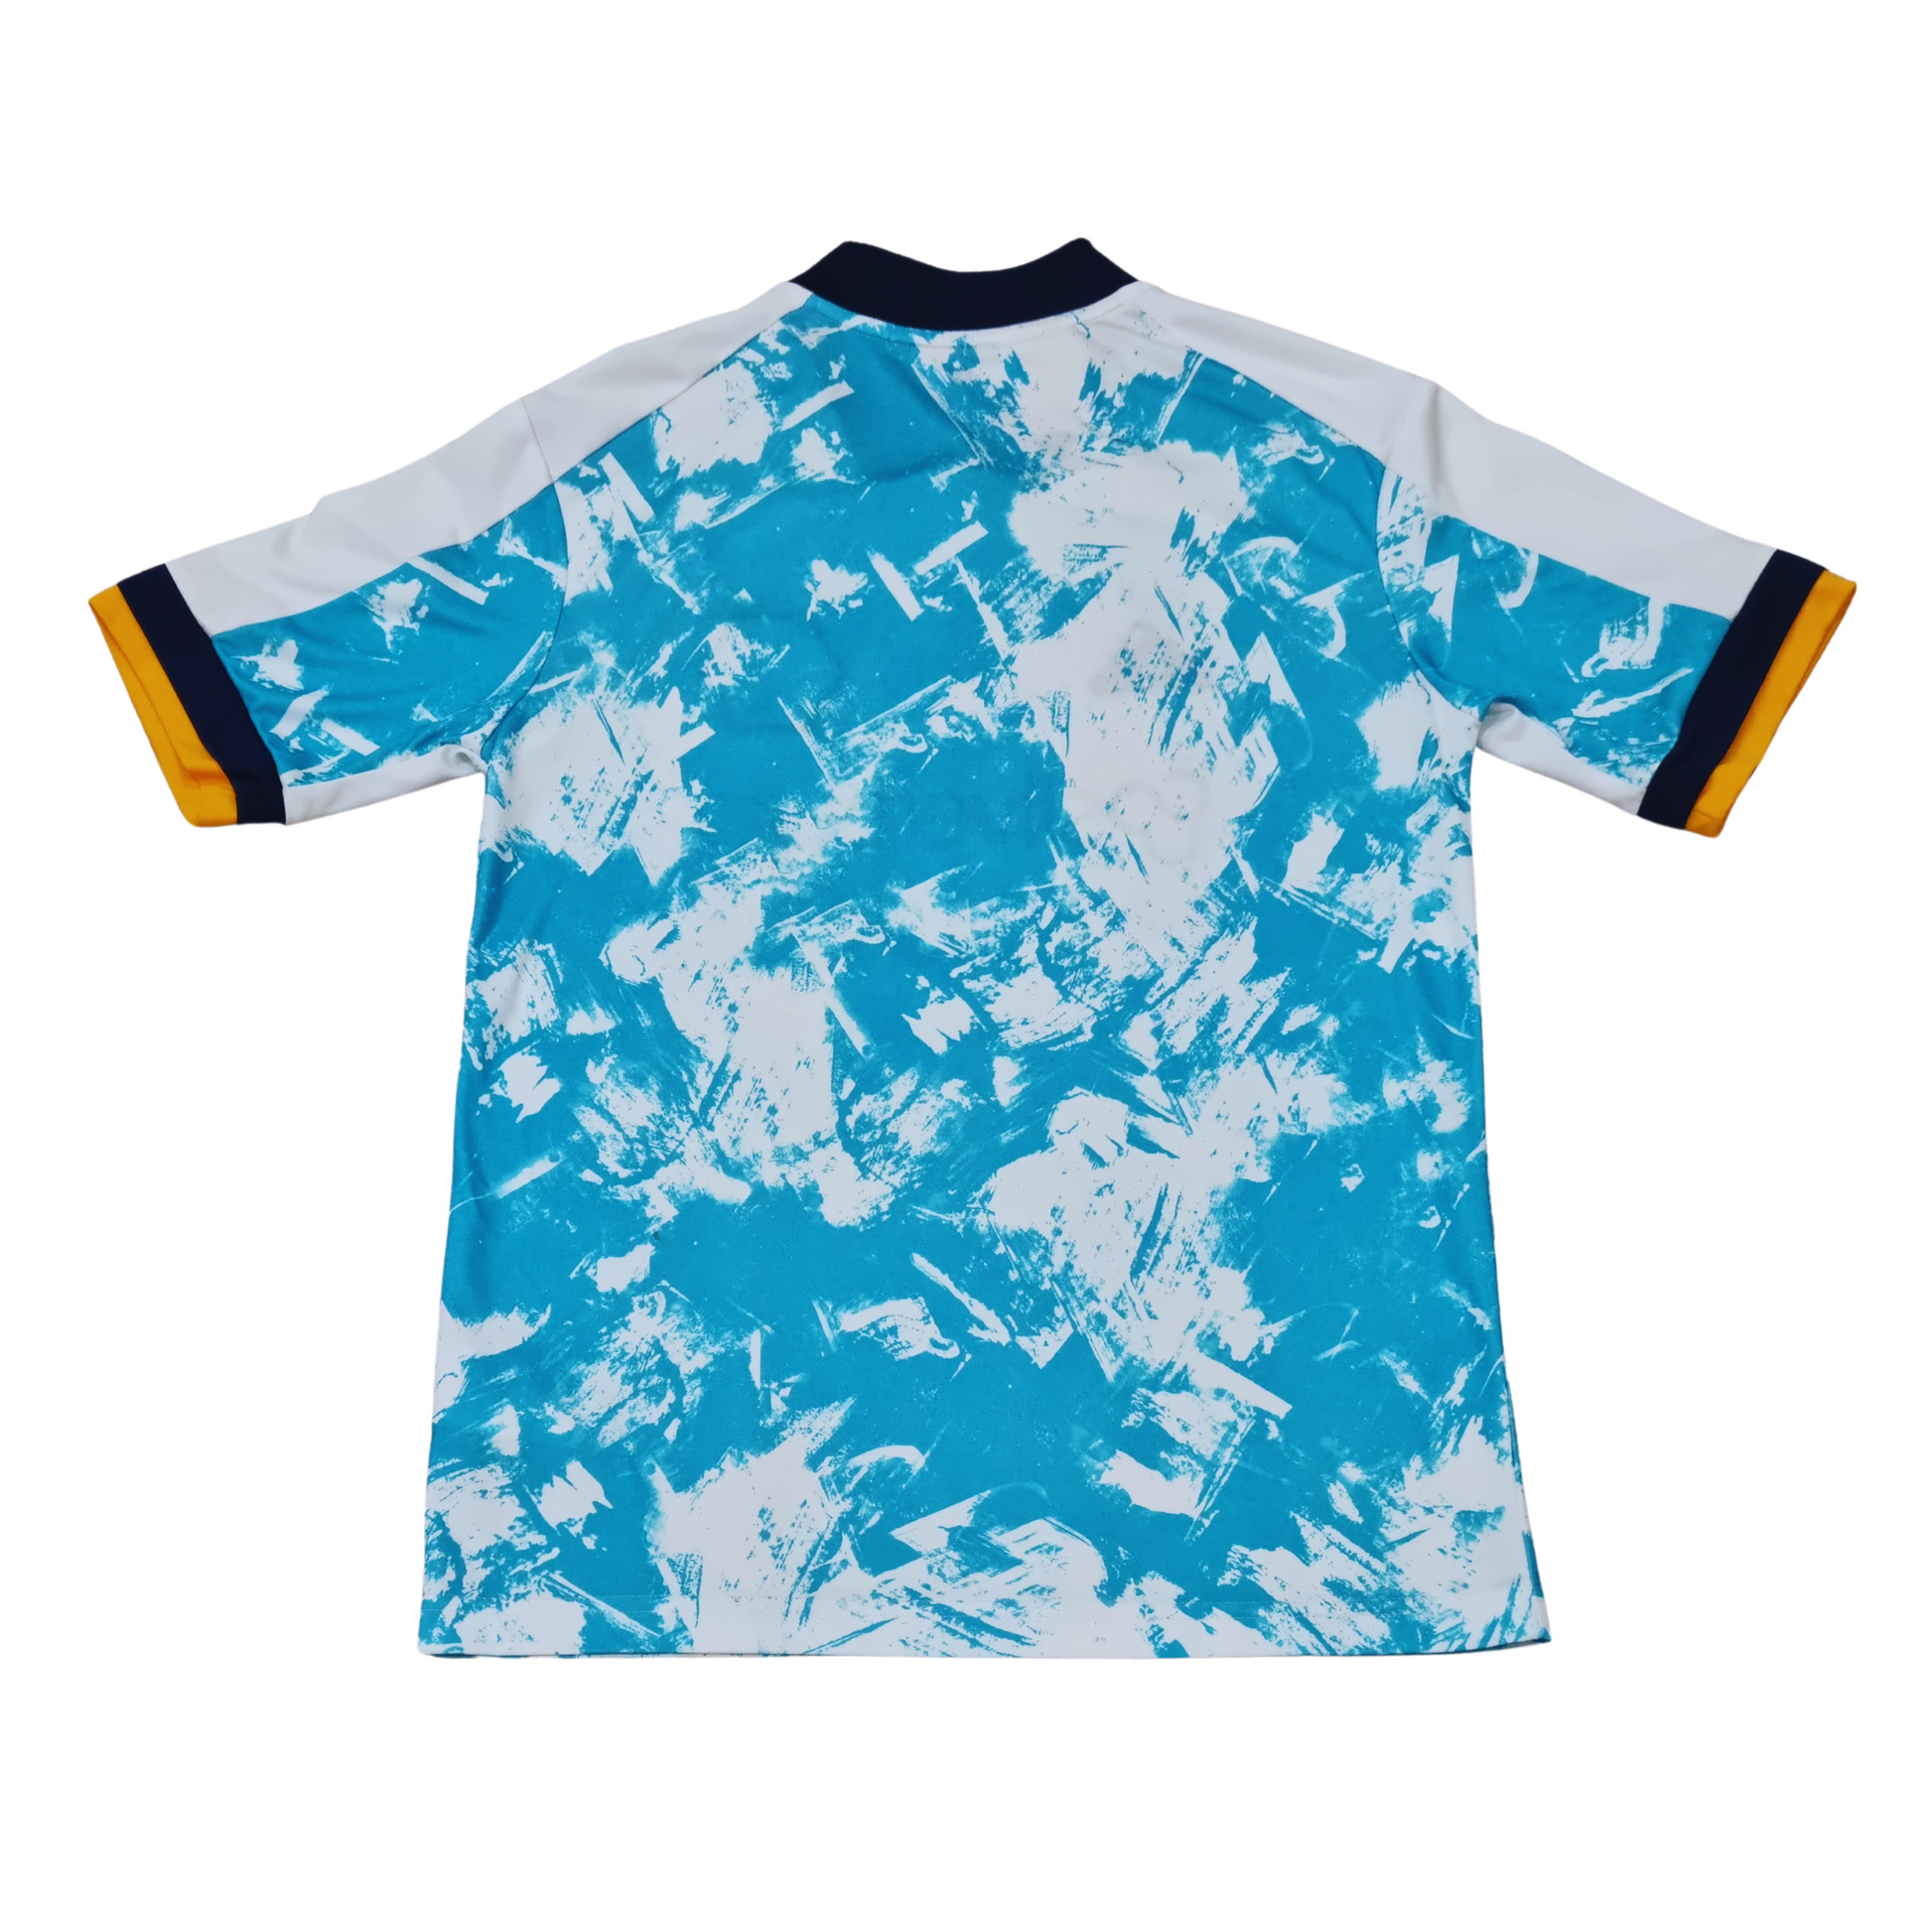 The Wolverhampton Wanderers' Adidas 2020/21 Away Jersey features a vibrant tie dye pattern in blue and yellow.